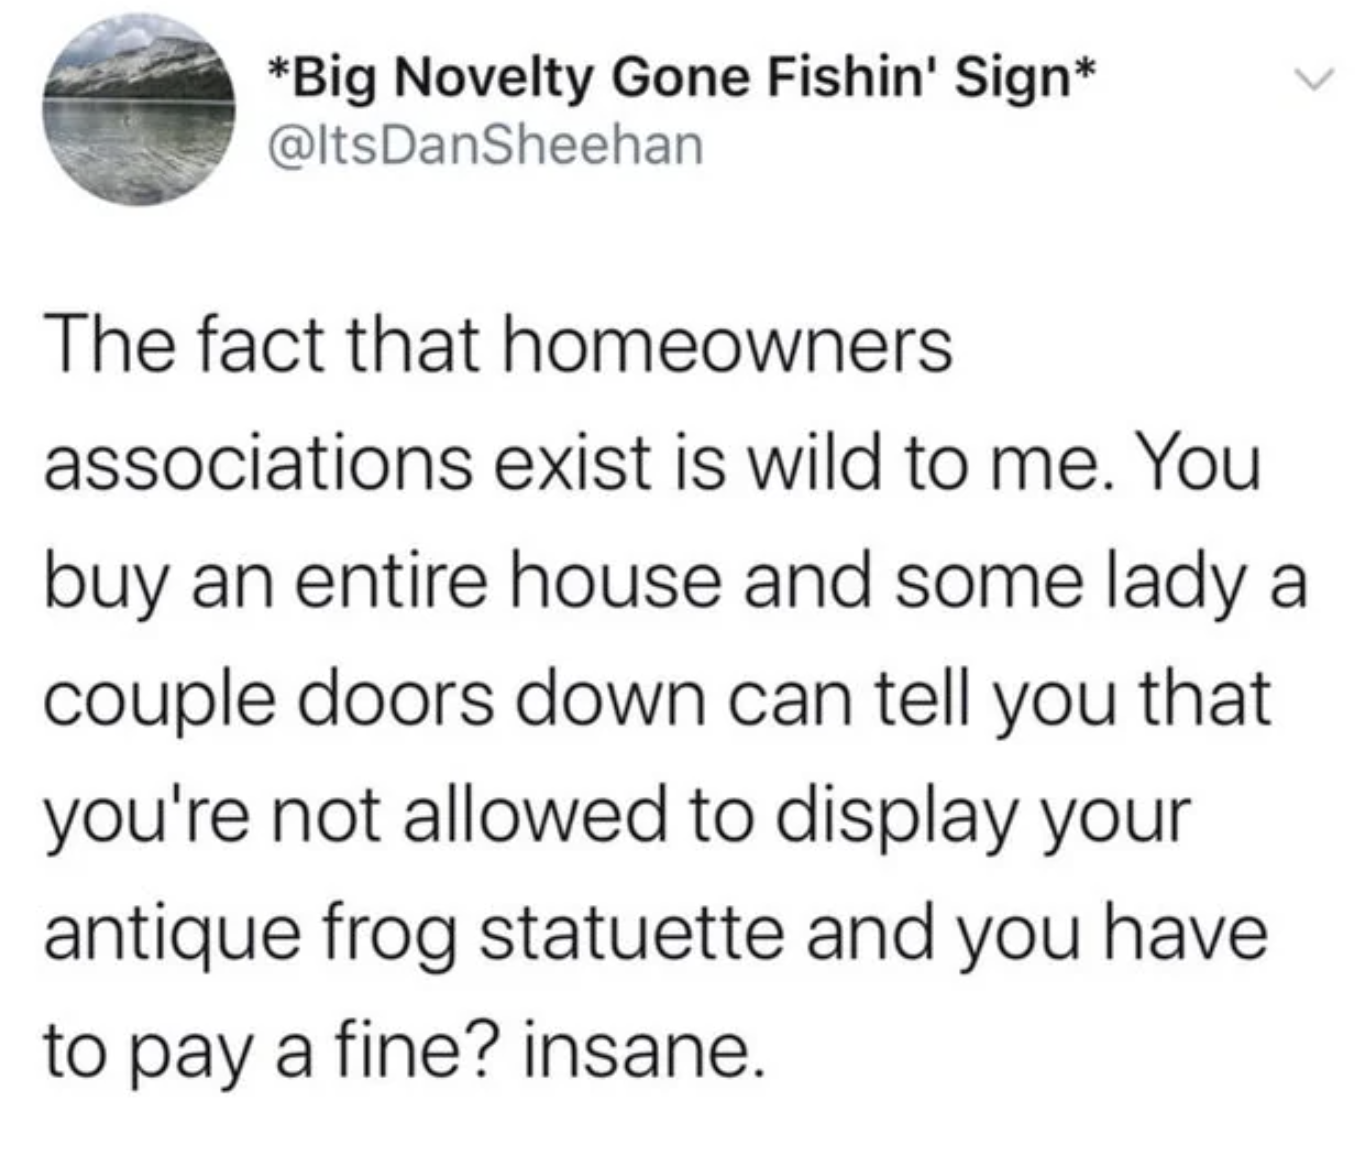 screenshot - Big Novelty Gone Fishin' Sign The fact that homeowners associations exist is wild to me. You buy an entire house and some lady a couple doors down can tell you that you're not allowed to display your antique frog statuette and you have to pay